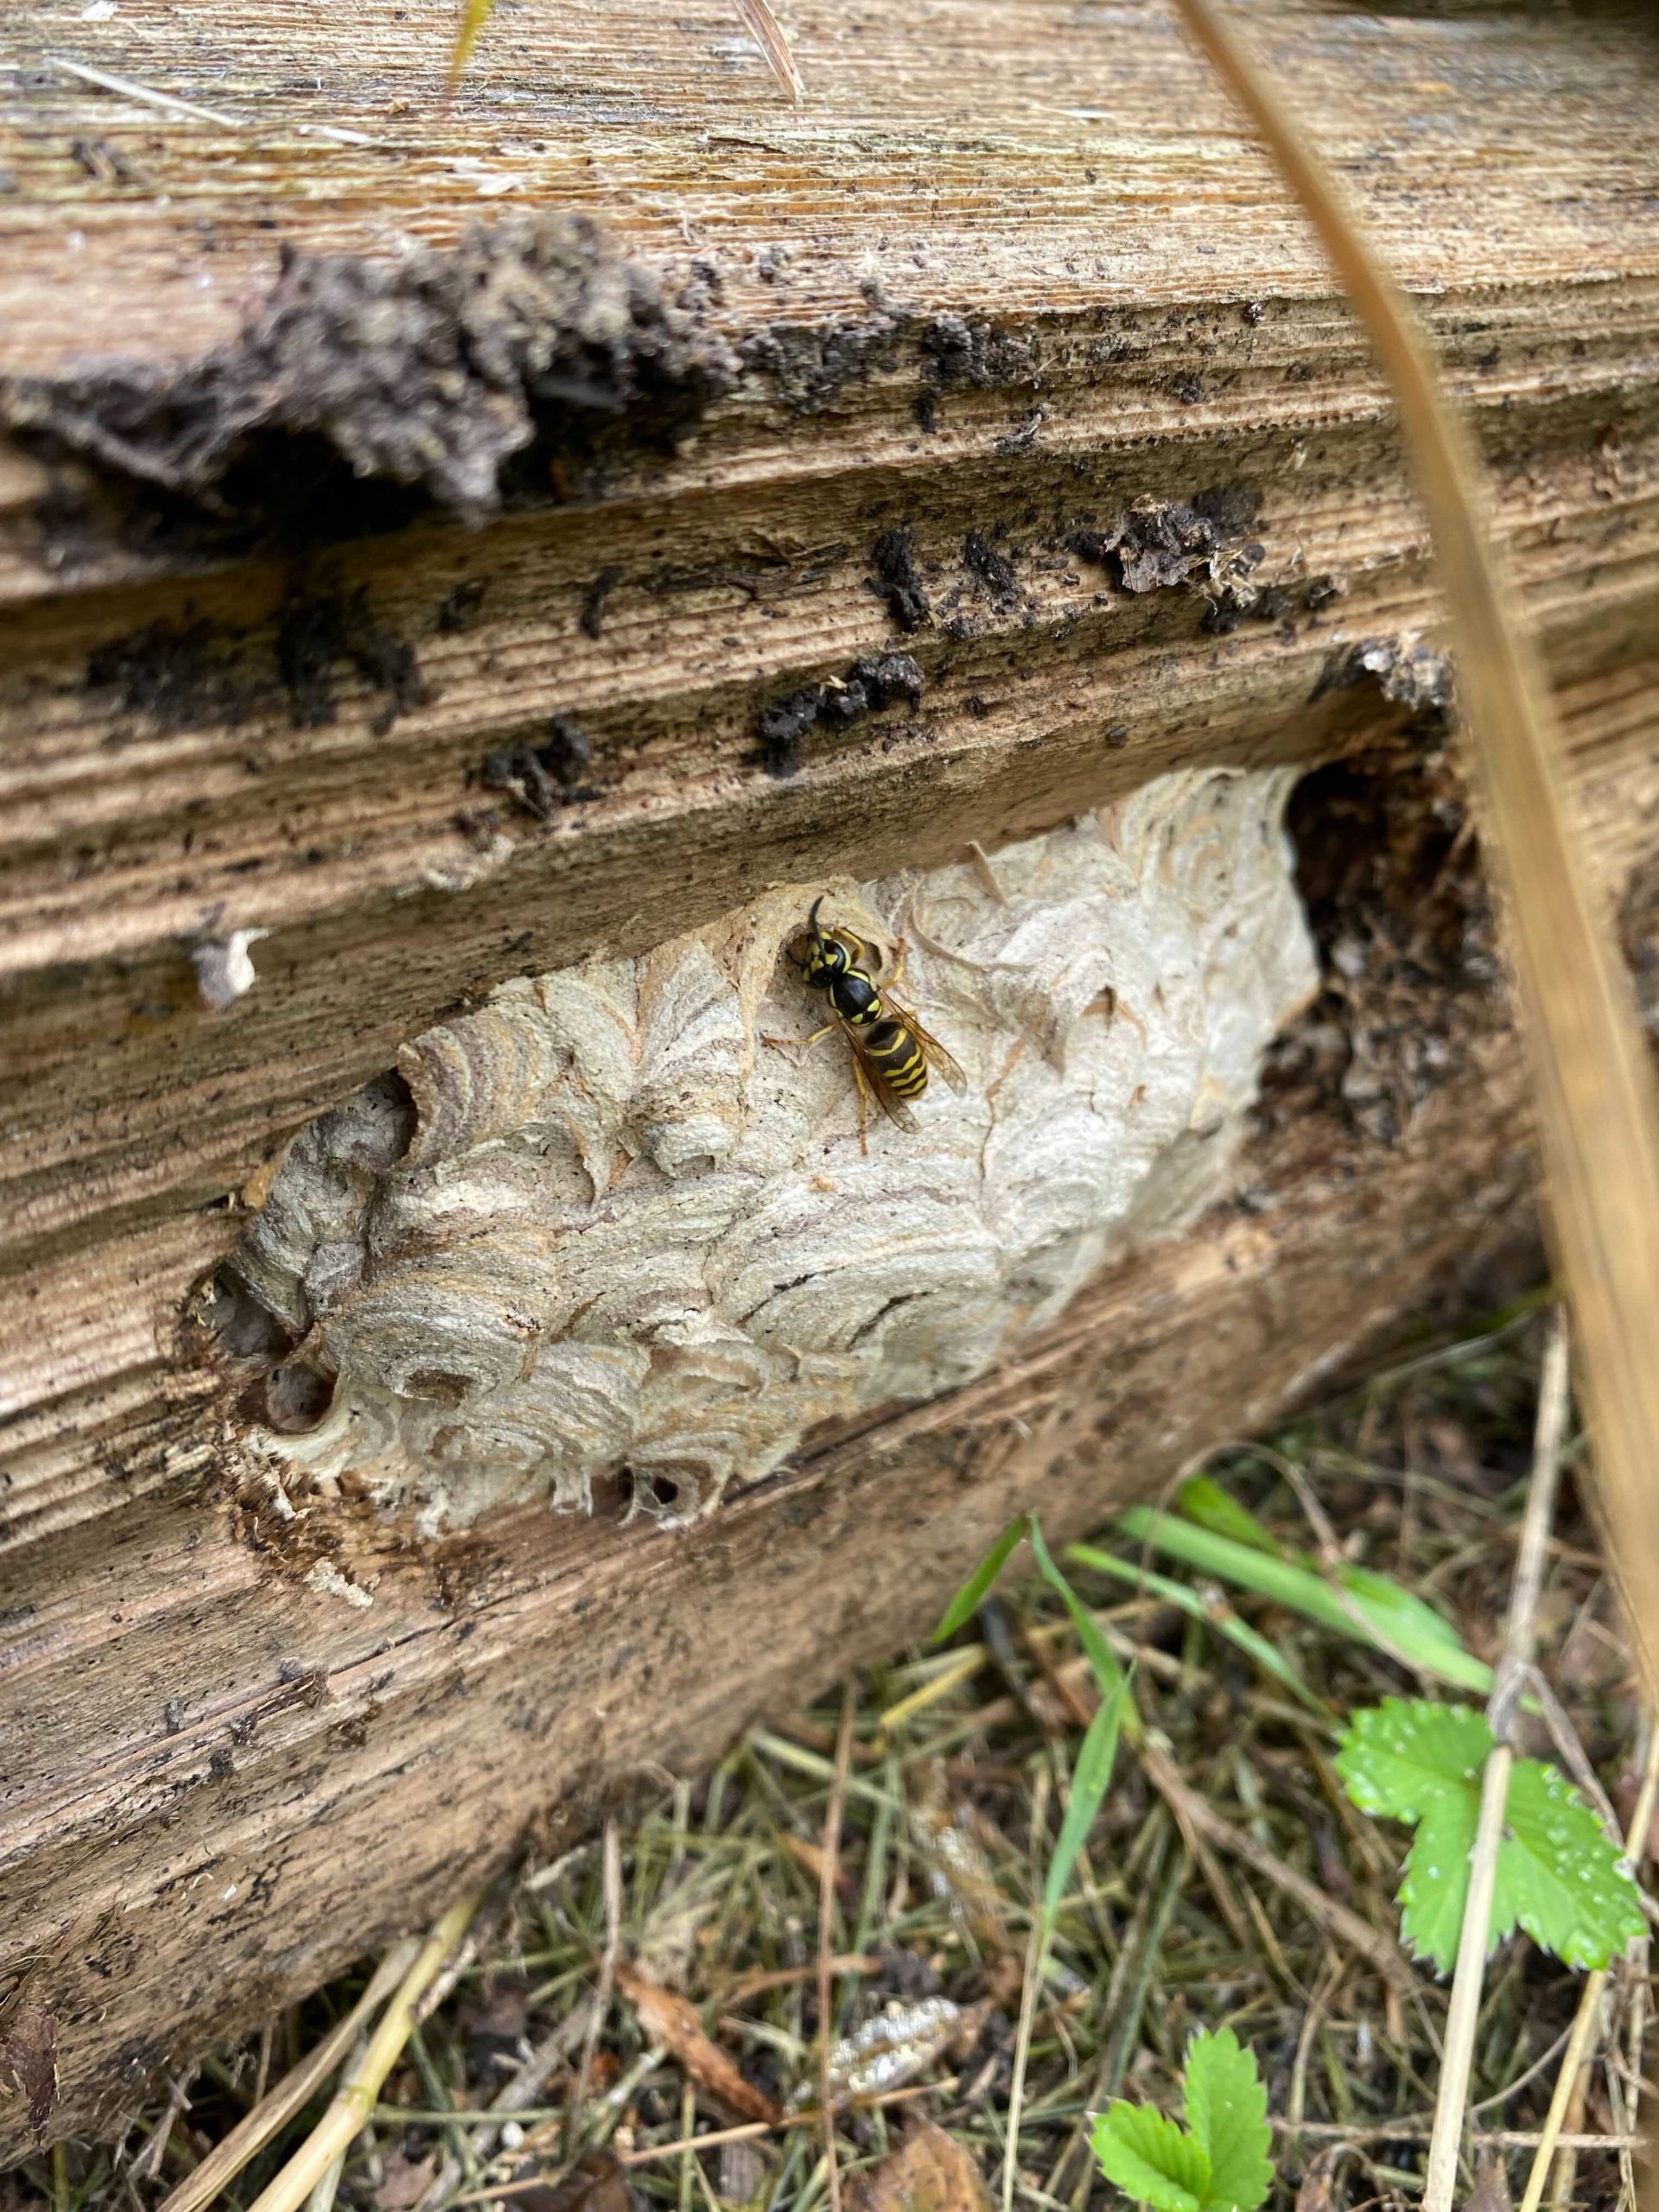 Yellowjacket Nest in a fence post.